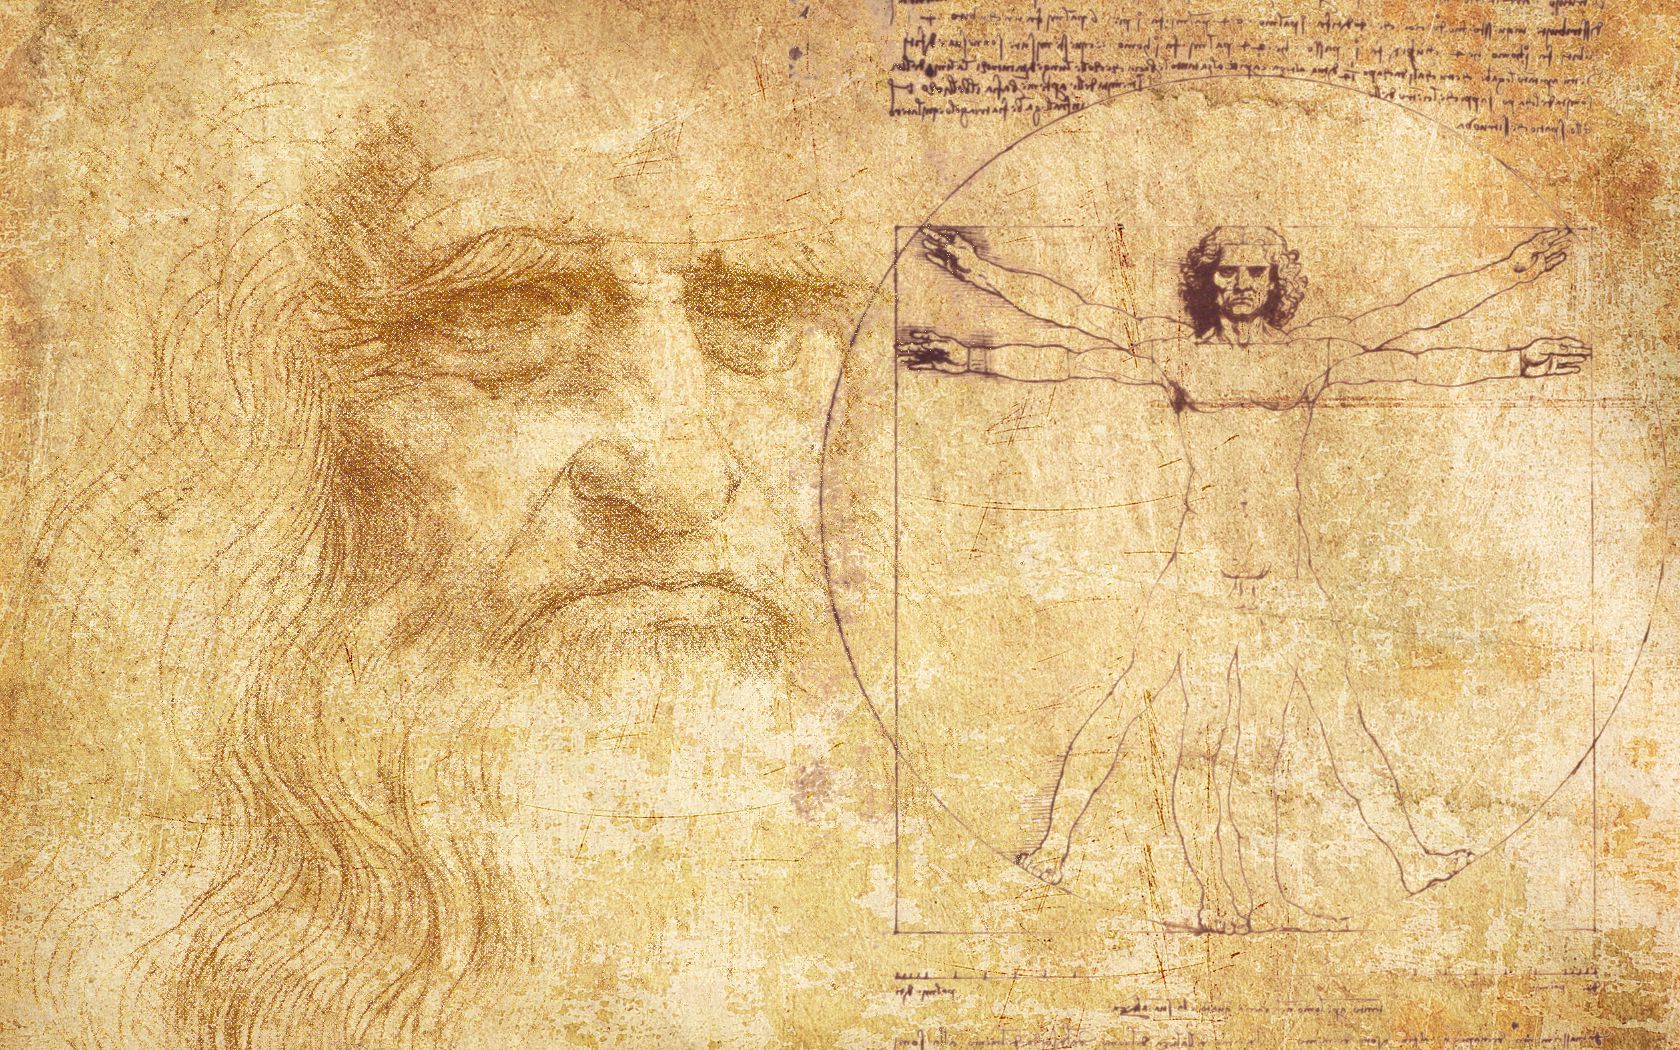 download the house of da vinci pc for free